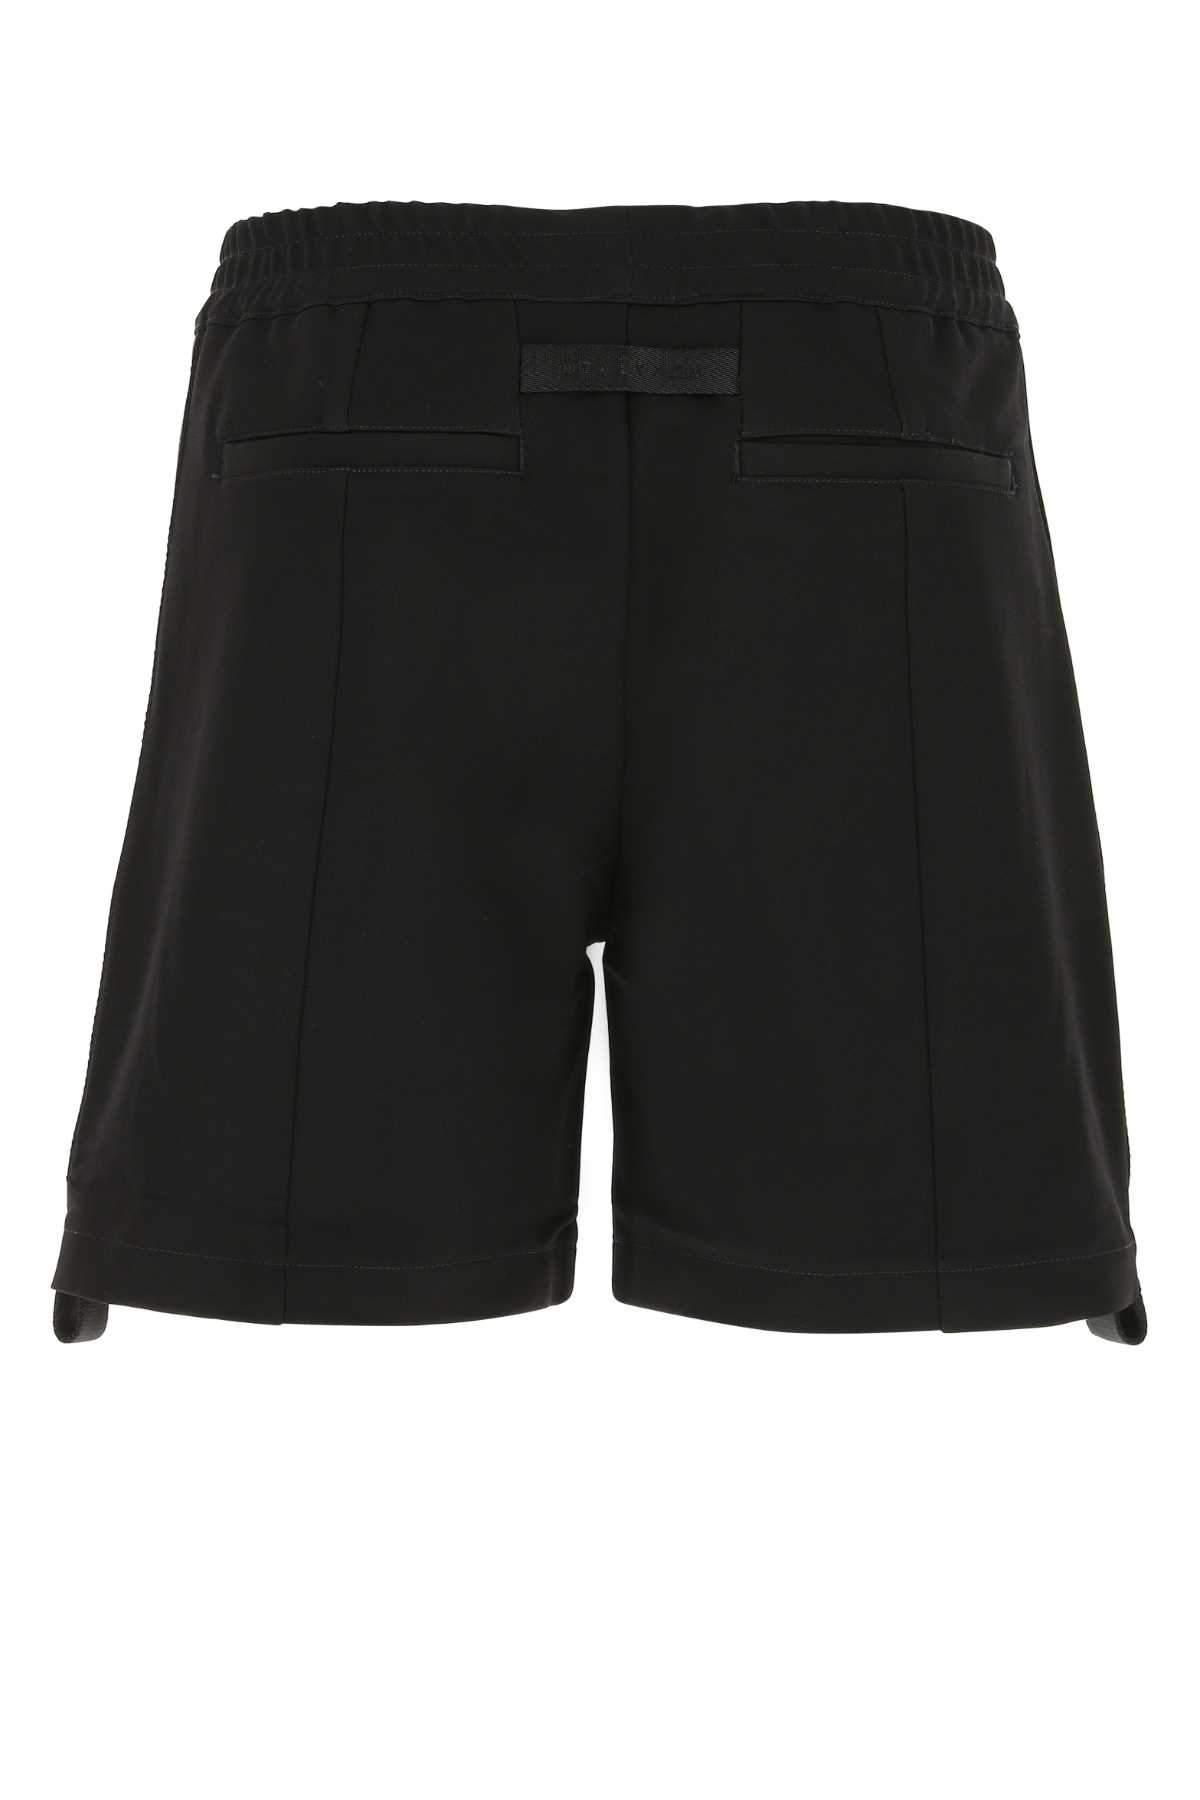 1017 ALYX 9SM Synthetic Logo Track Shorts in Black for Men - Lyst